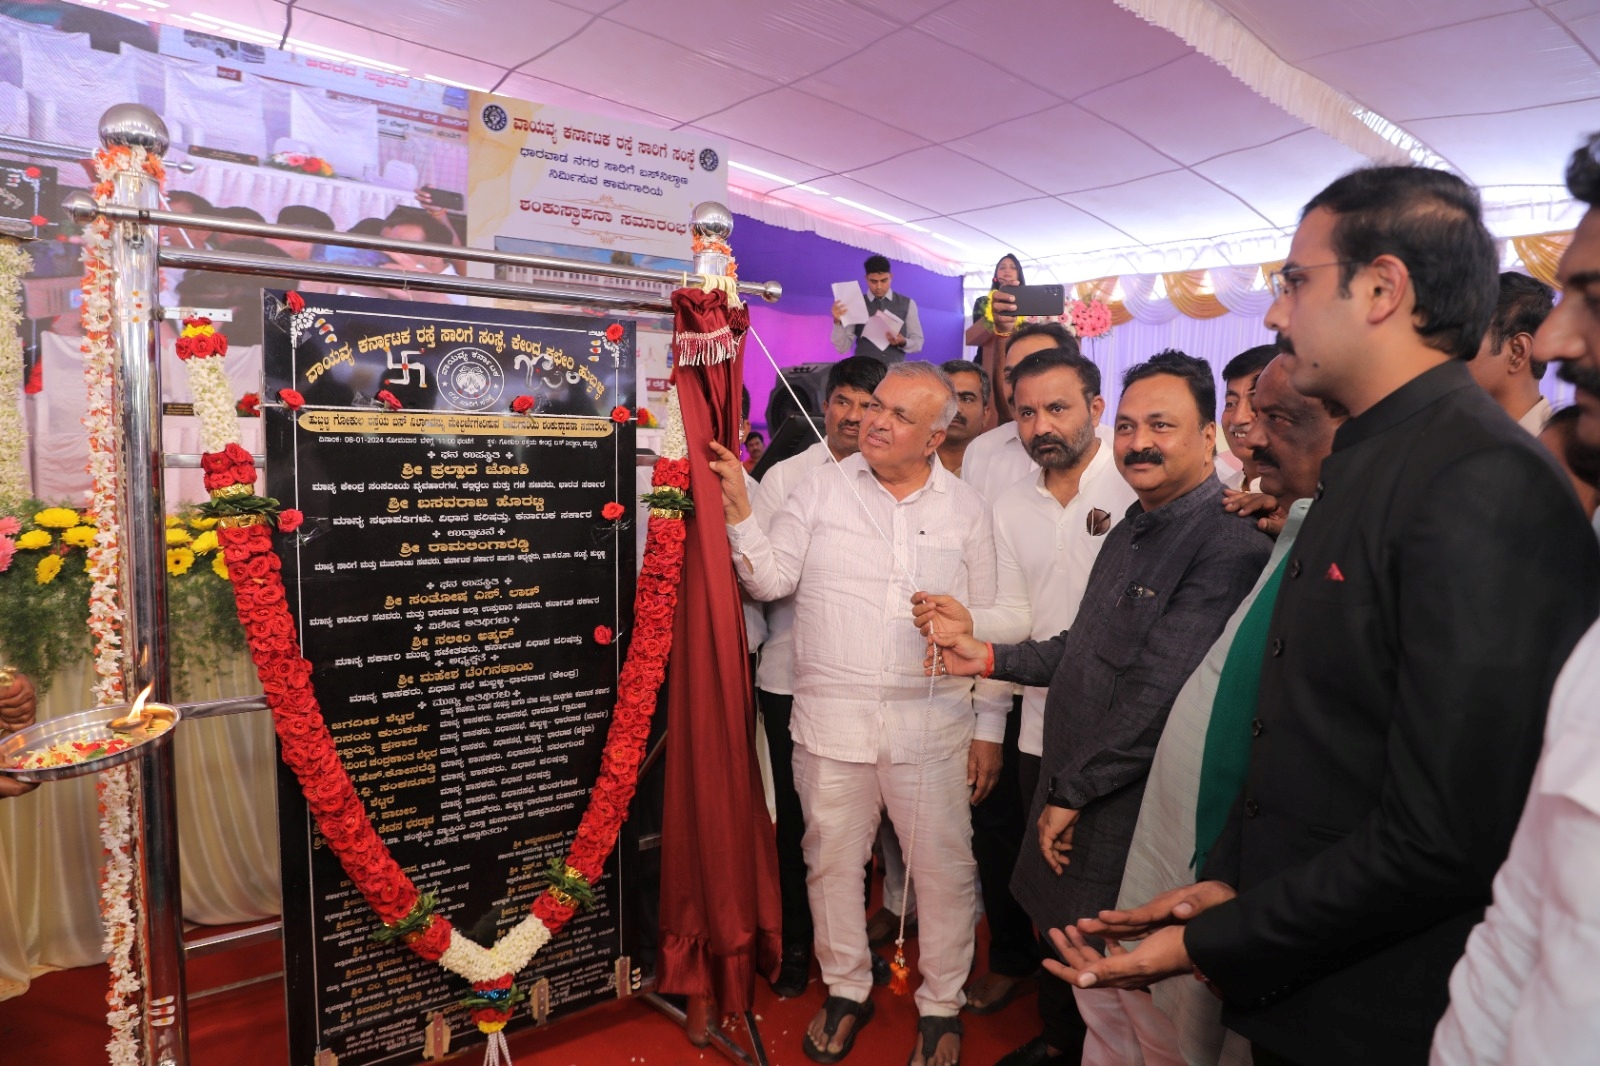 transport-department-will-provide-new-buses-for-nwkrtc-says-minister-ramalinga-reddy